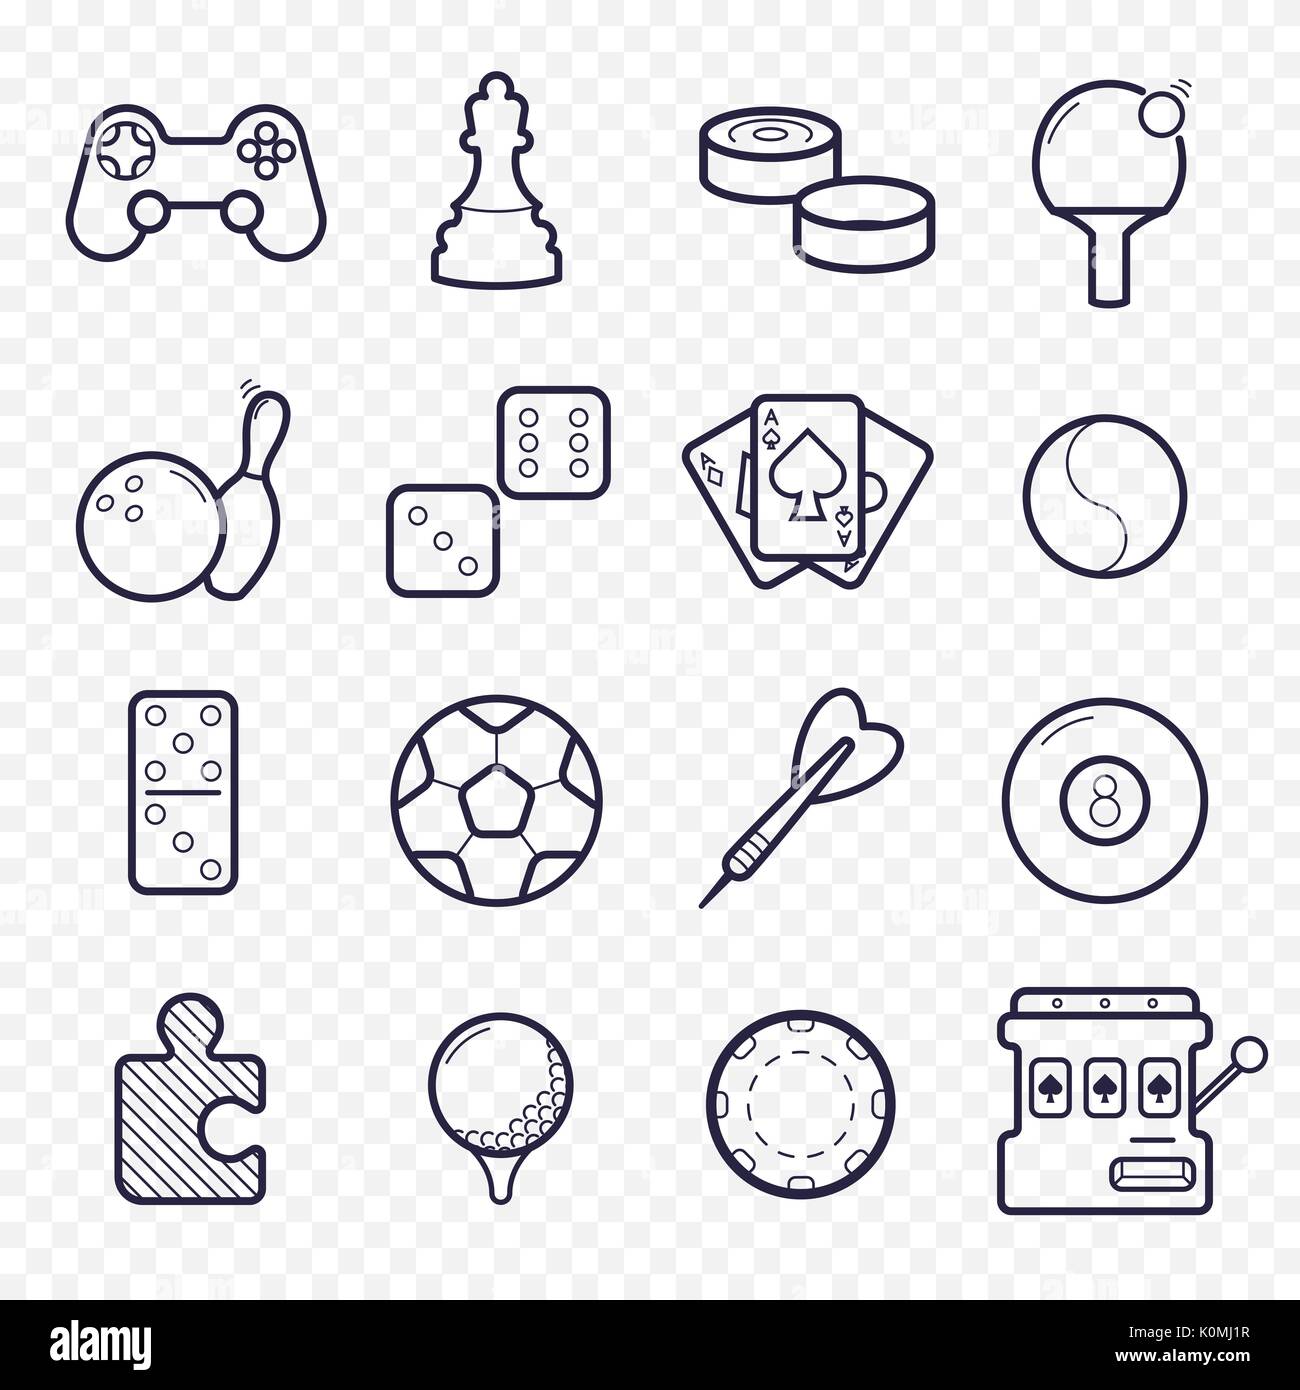 Games linear icons. Ping-pong, golf, billiards, darts leisure activities. Gambling, sport game line icons. Stock Vector